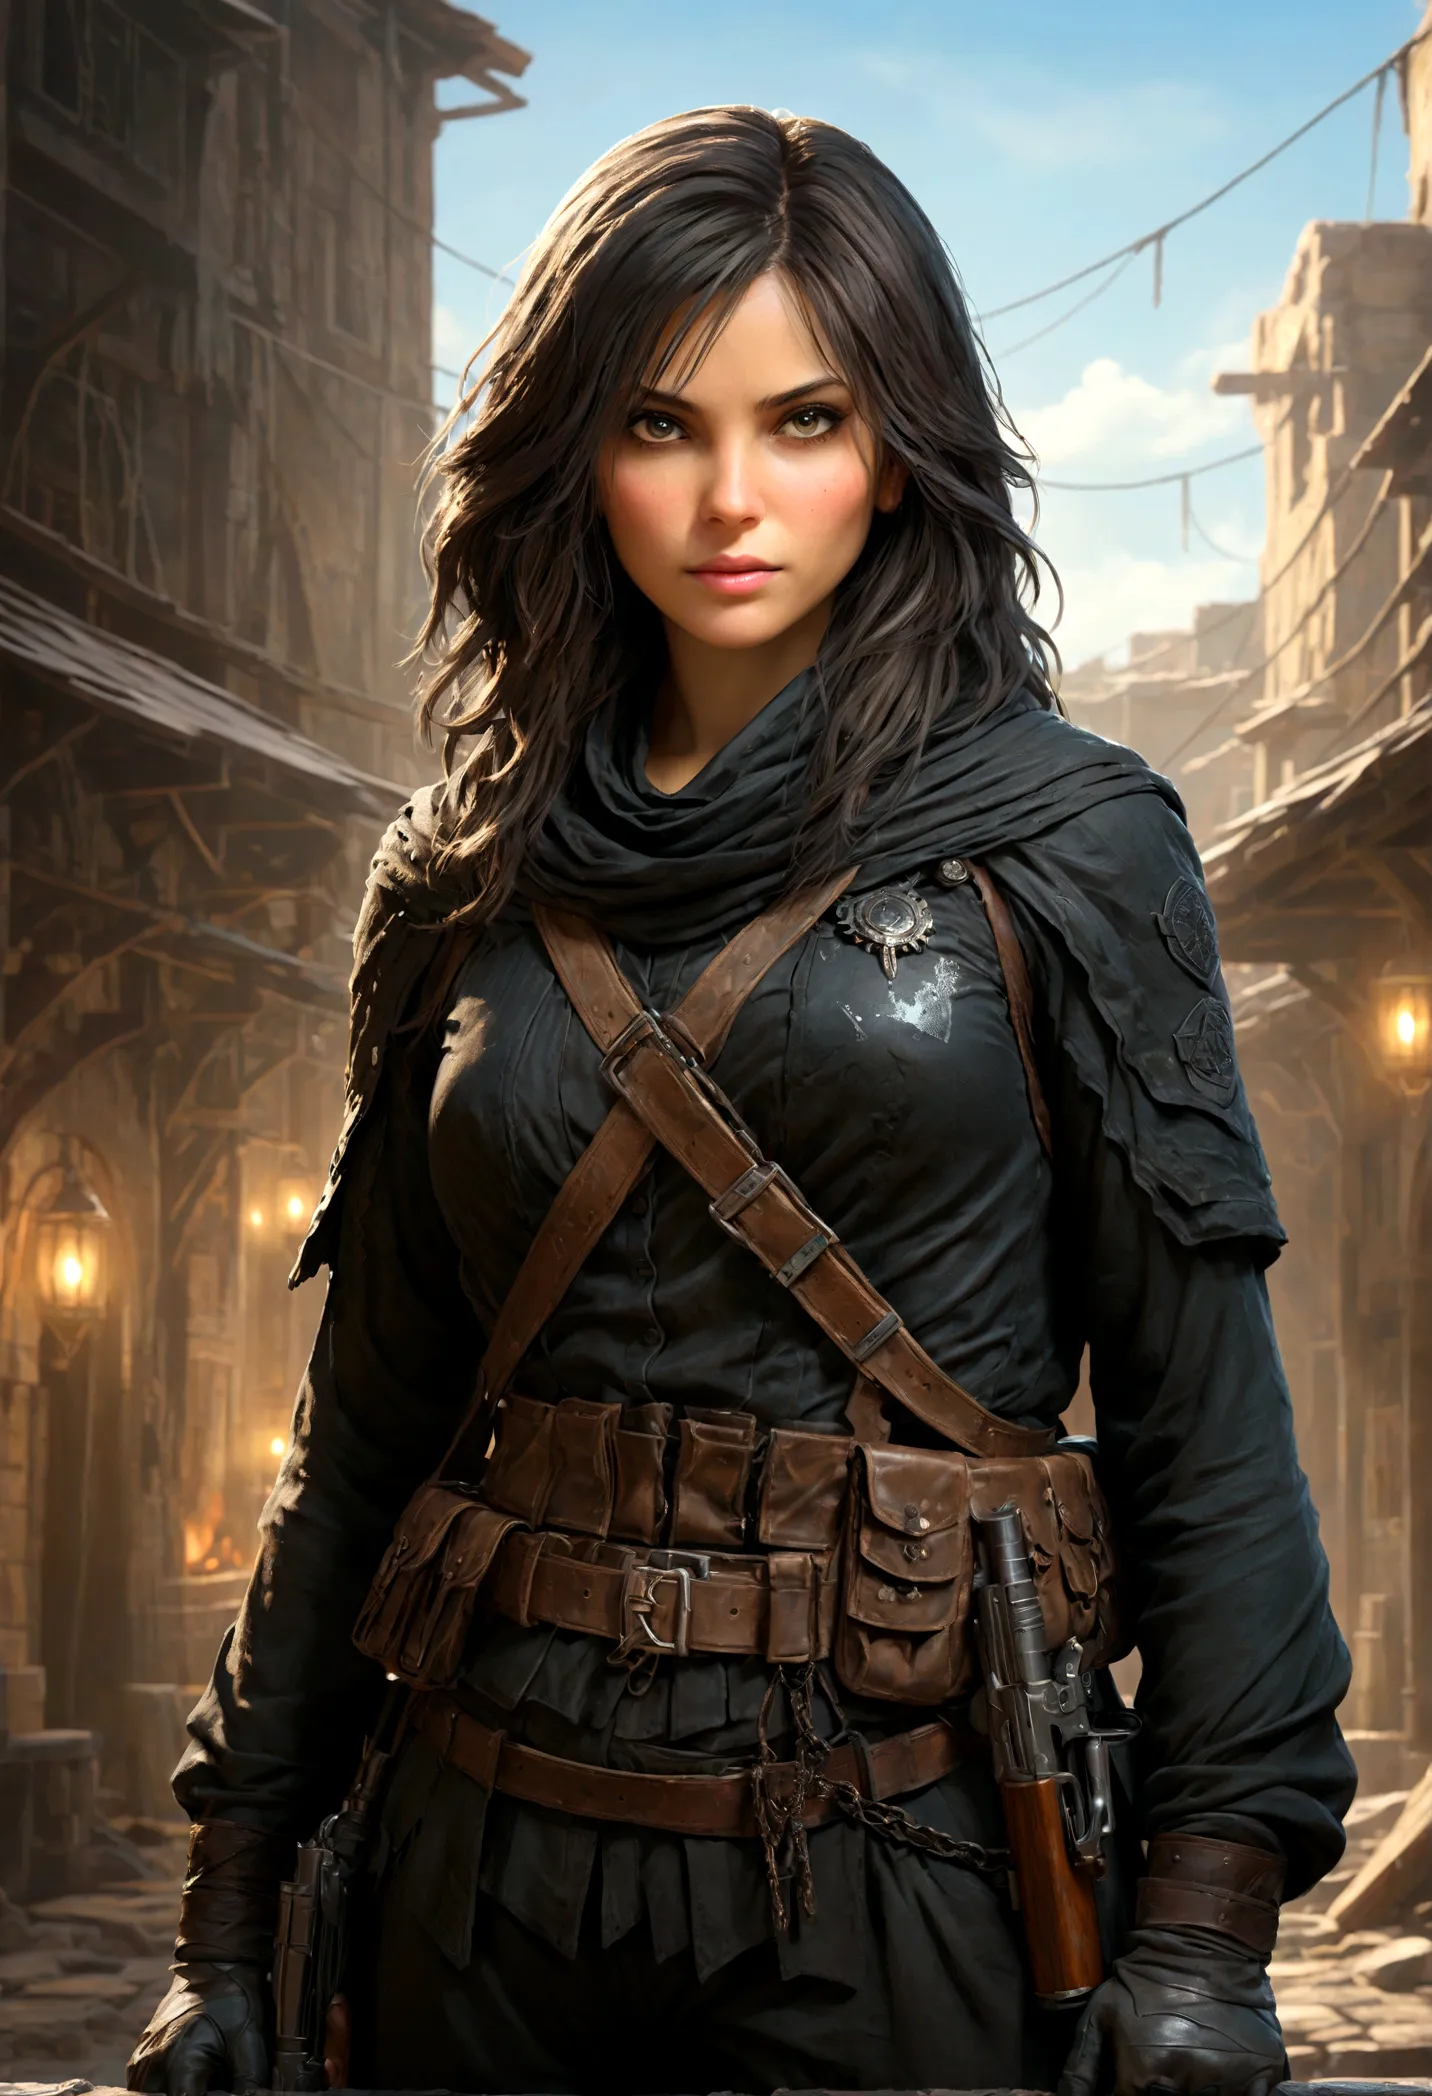 create a beautiful detailed image of a powerful and confident female division character holding a gun. she should exude strength...